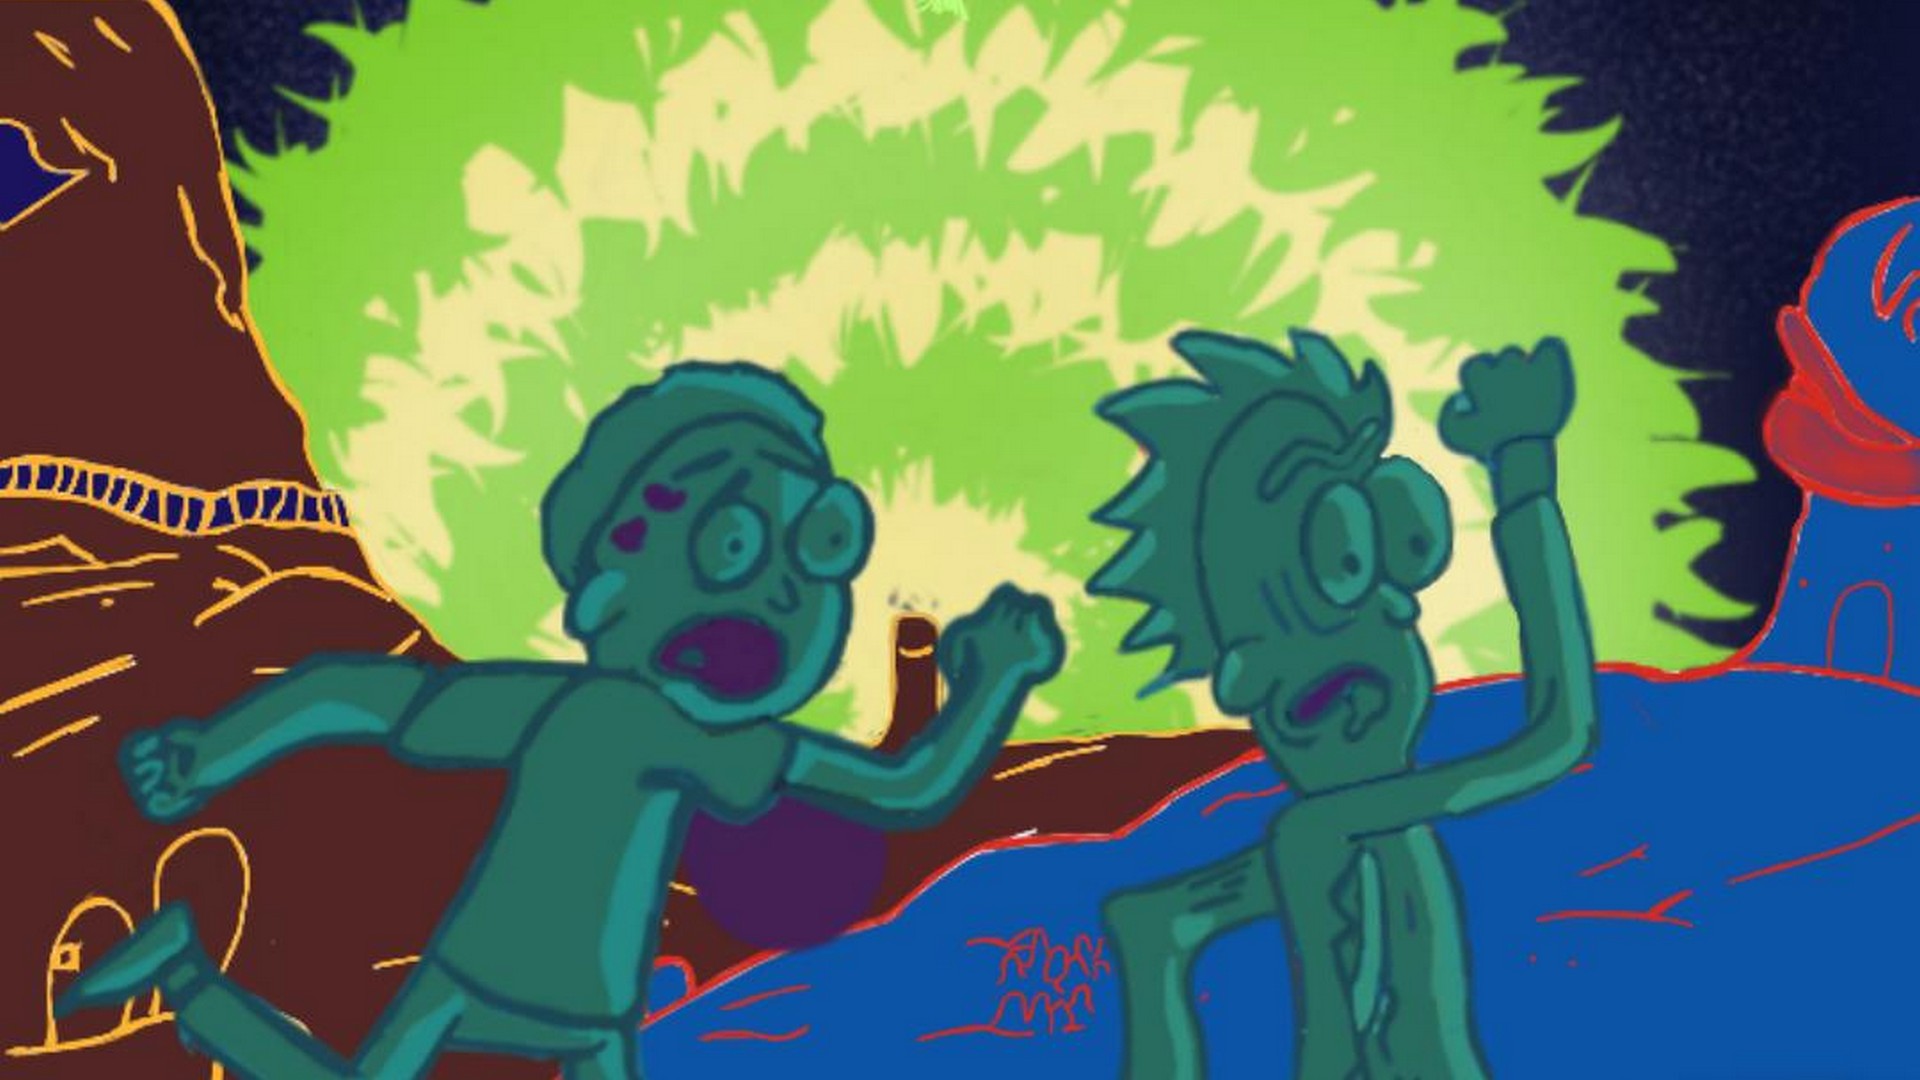 Best New Rick and Morty Wallpaper with image resolution 1920x1080 pixel. You can use this wallpaper as background for your desktop Computer Screensavers, Android or iPhone smartphones